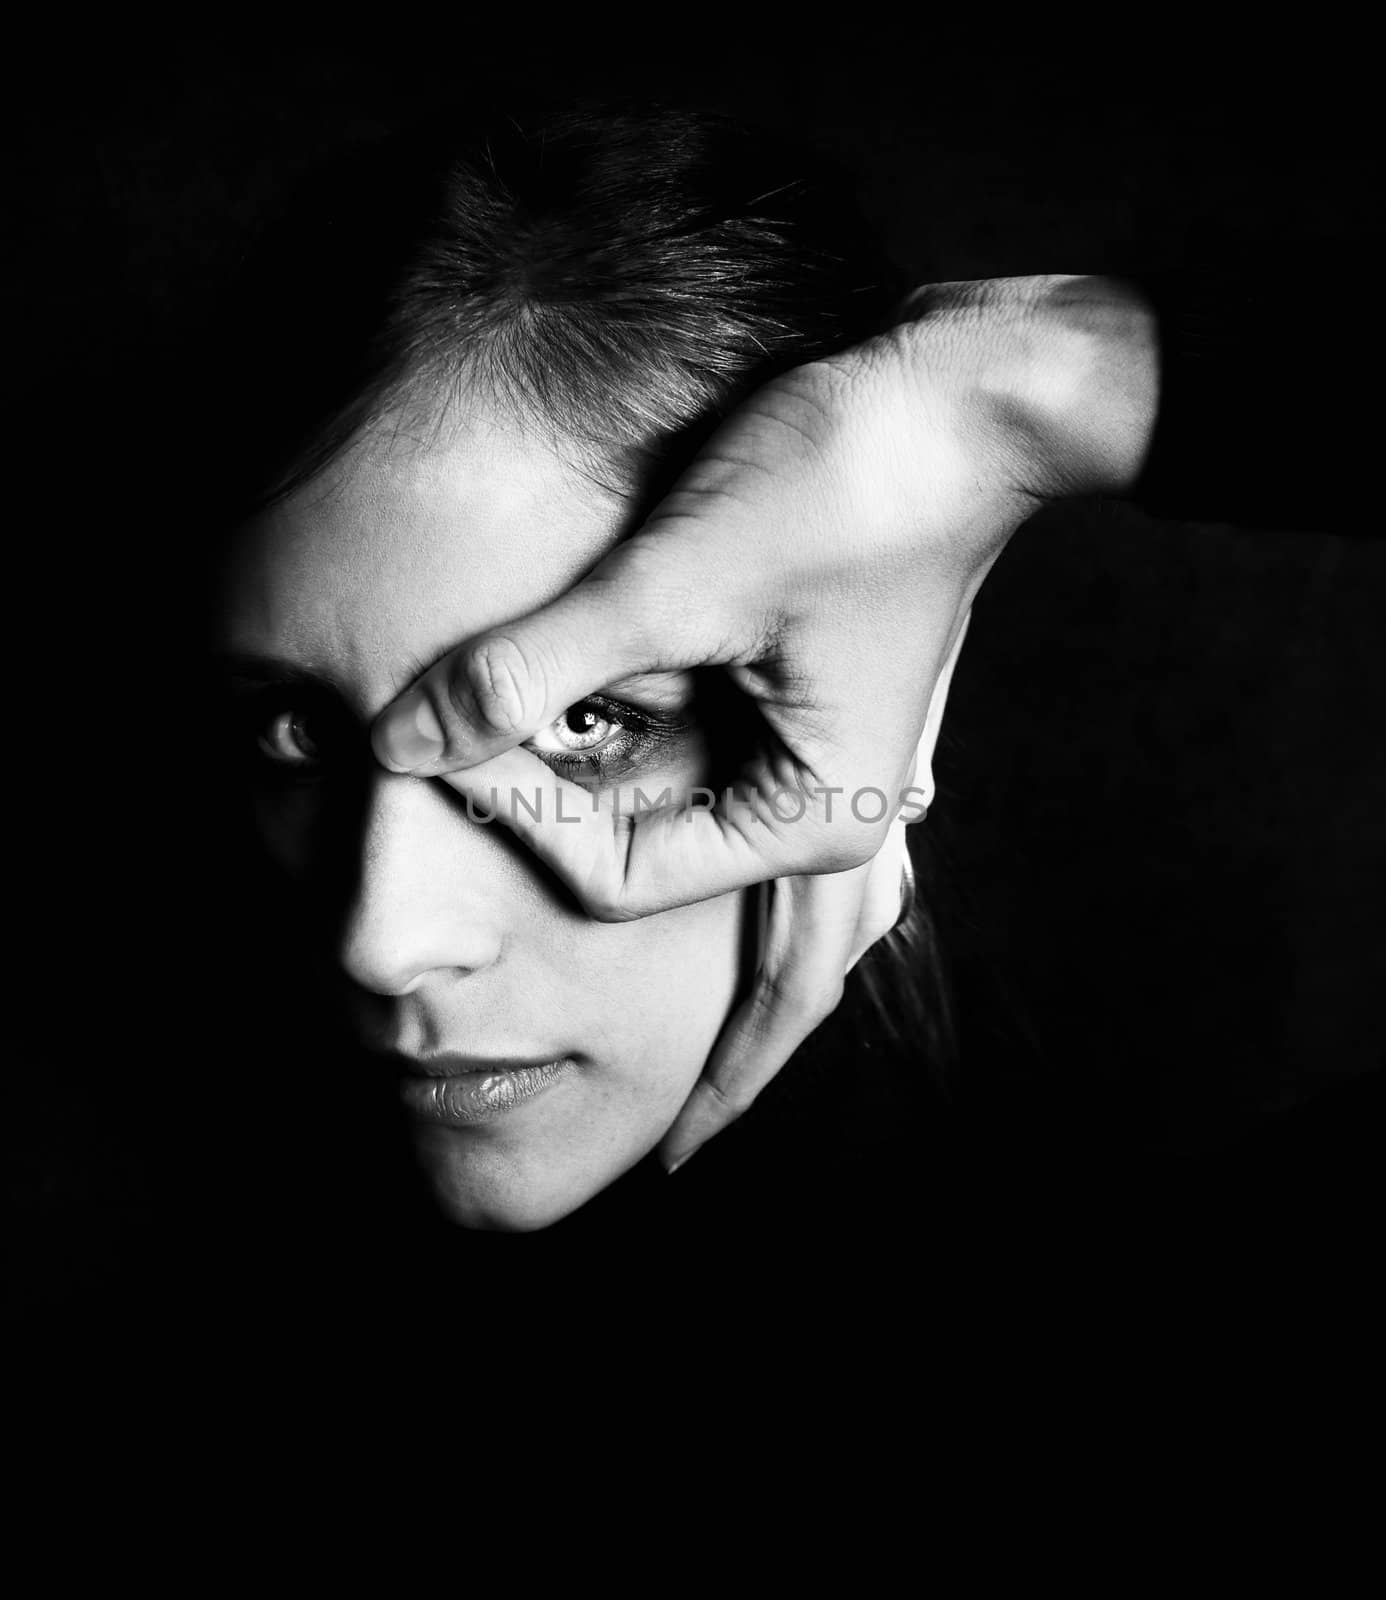 Model wearing dark makeup with hand in front of her eye